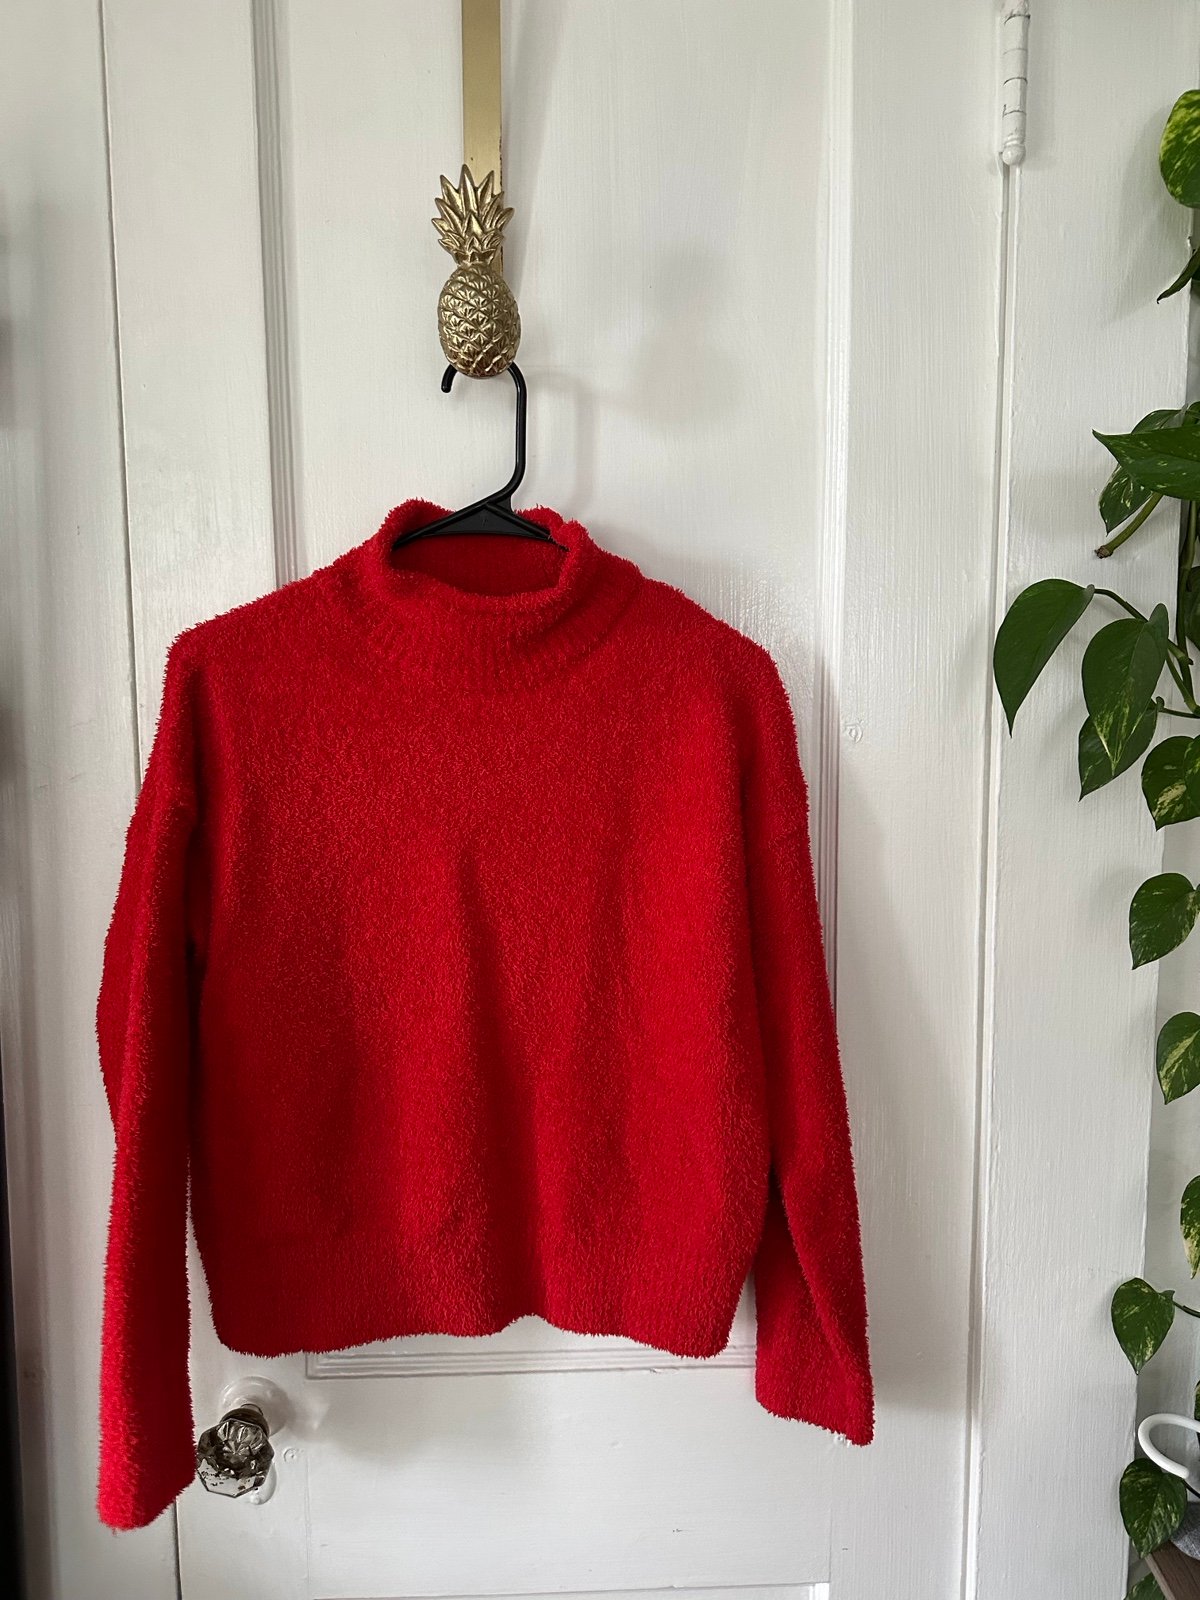 Special offer  Sincerely Jules Women’s size x-Small Red